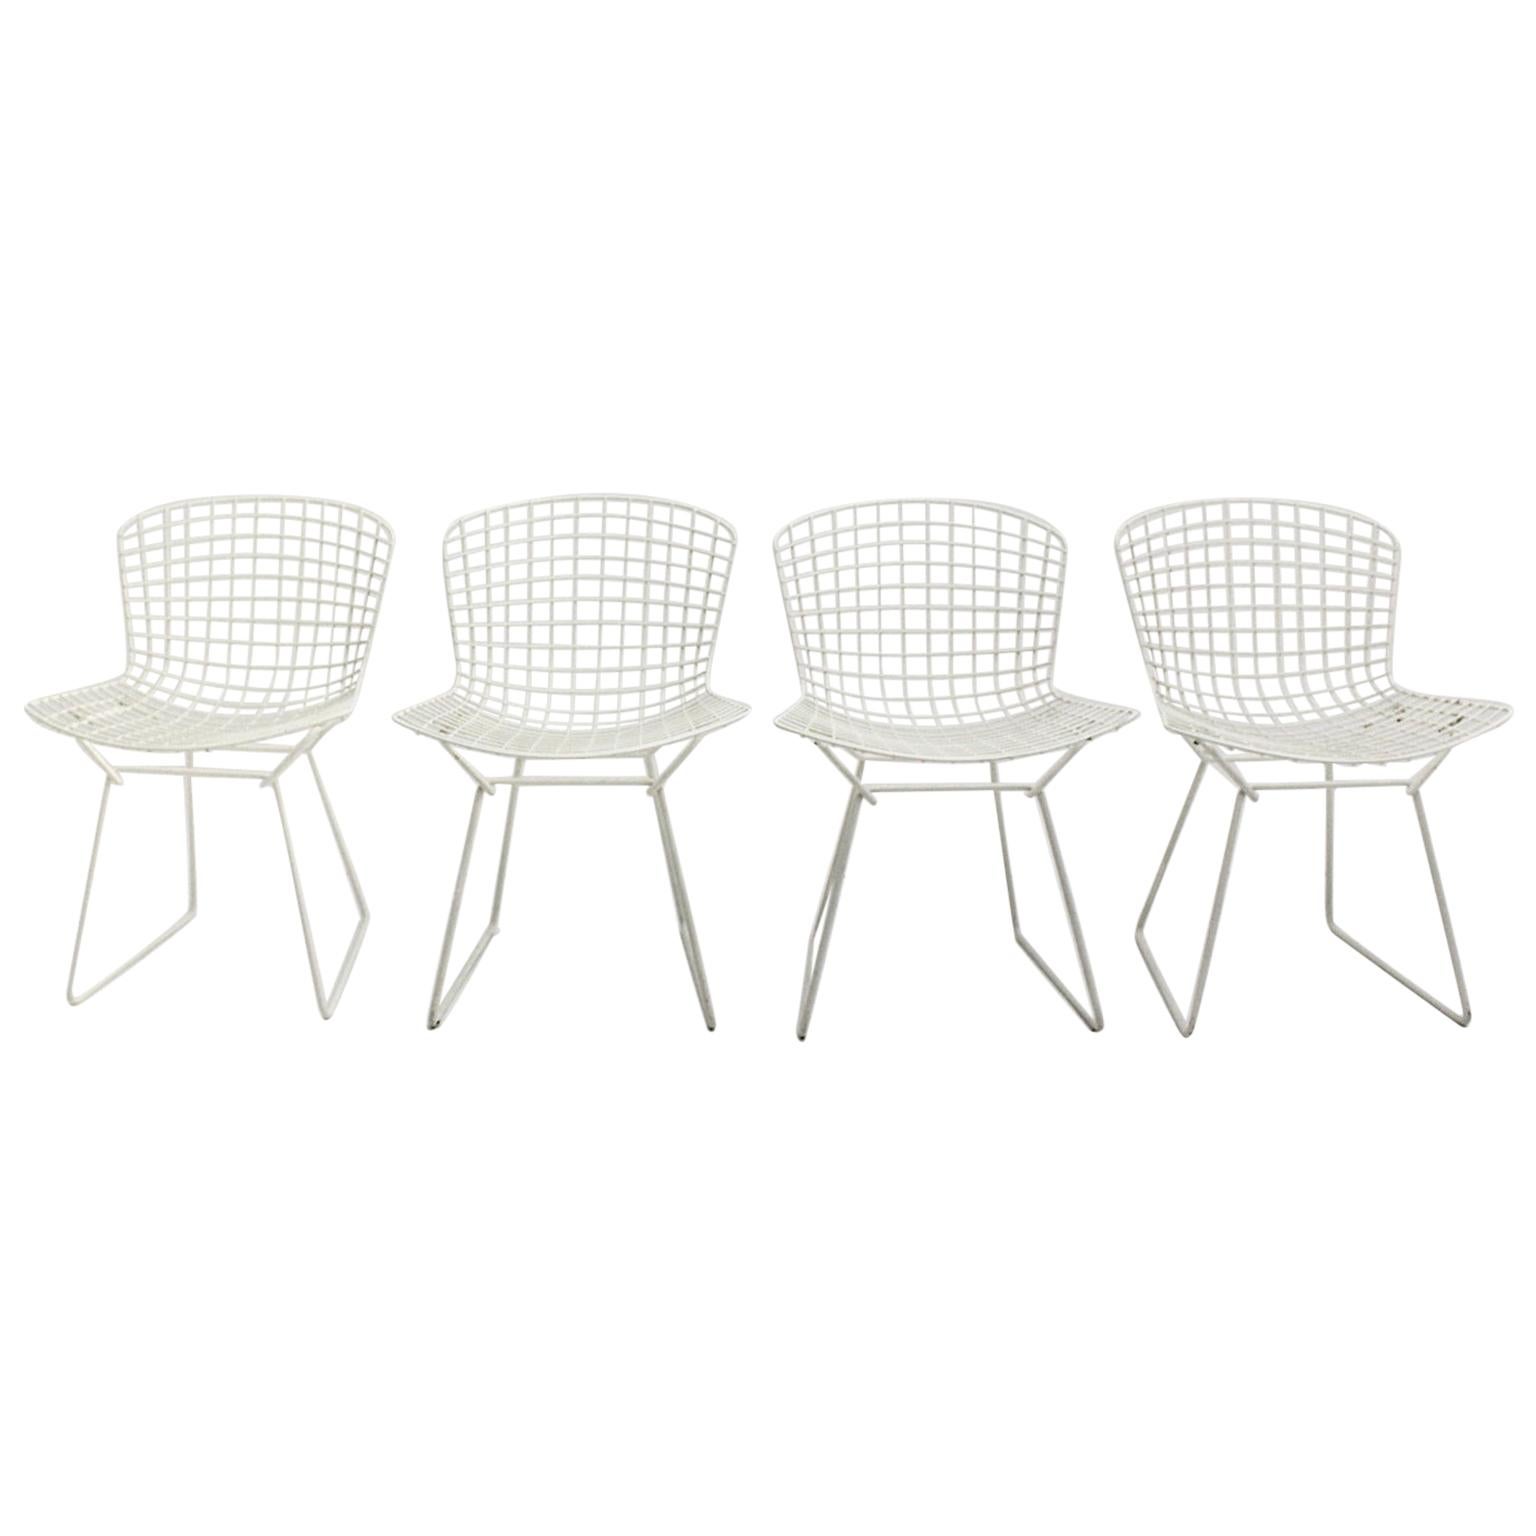 Harry Bertoia Mid-Century Modern Vintage Set of Four White Dining Chairs, 1950s For Sale